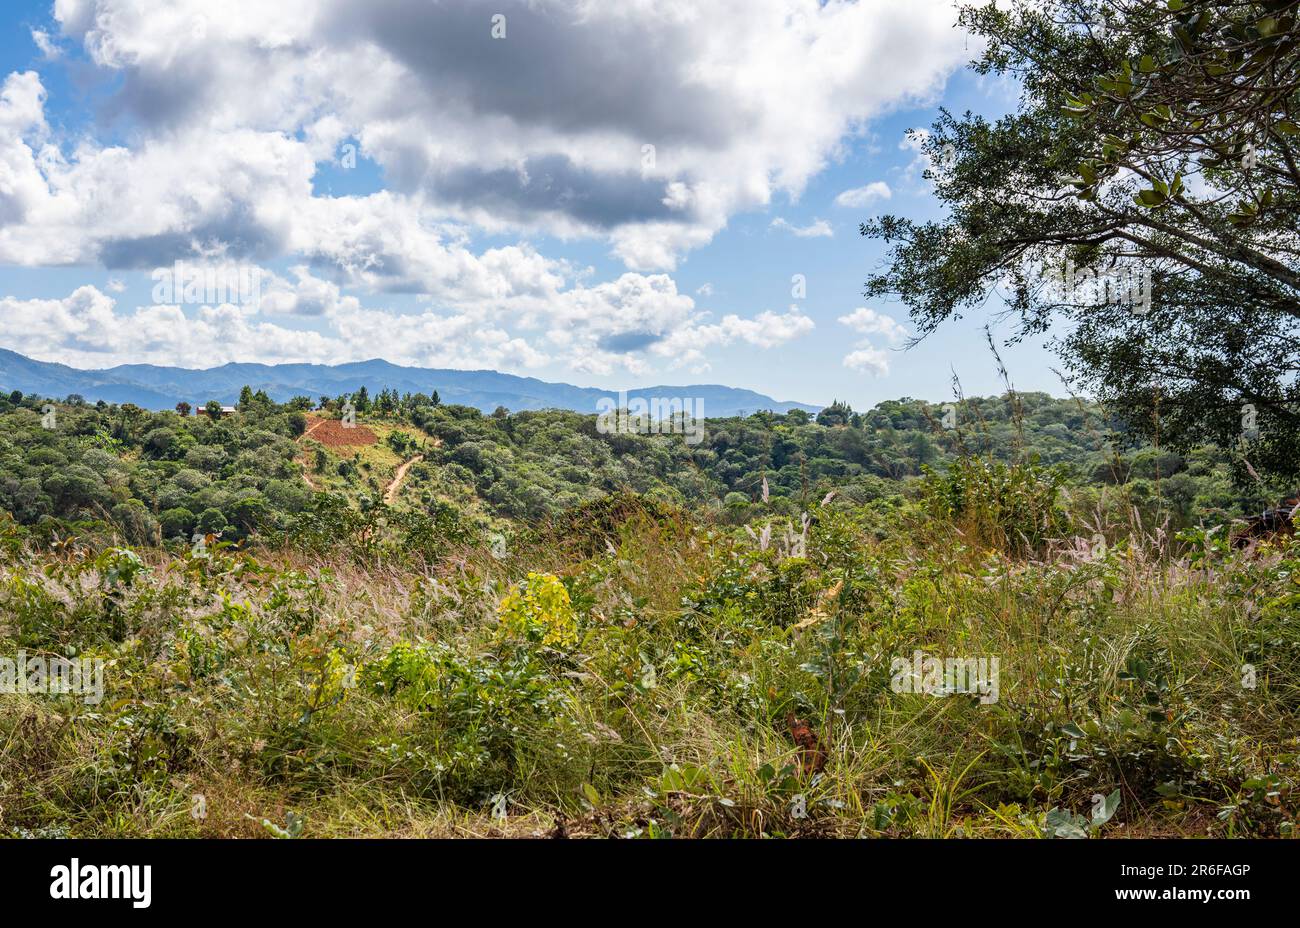 Green forested catchment in rural Malawi Stock Photo